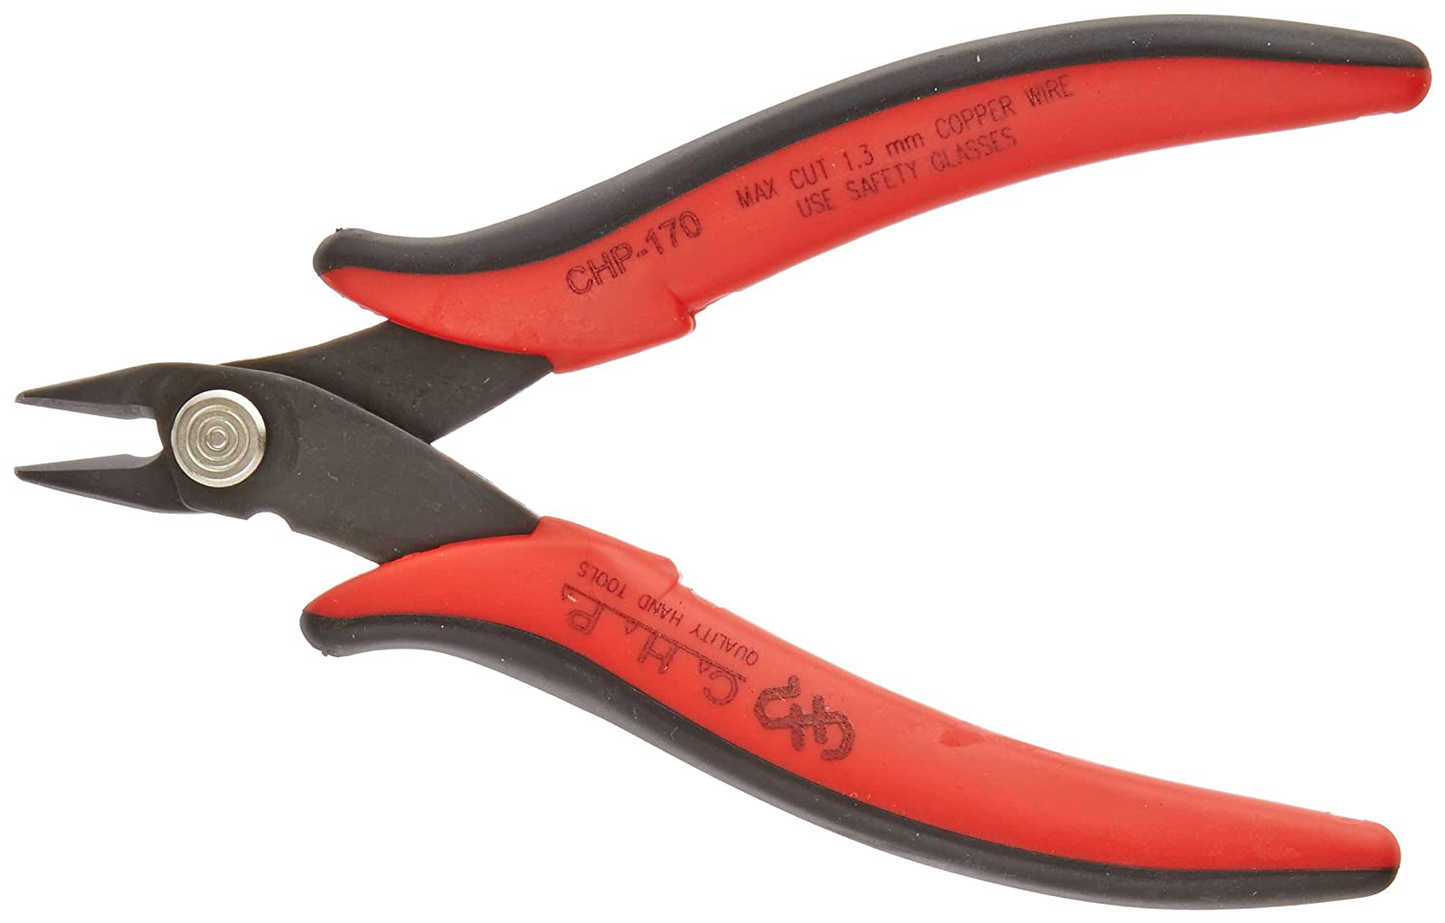 CHP-170 Micro Cutter (3 Pack)